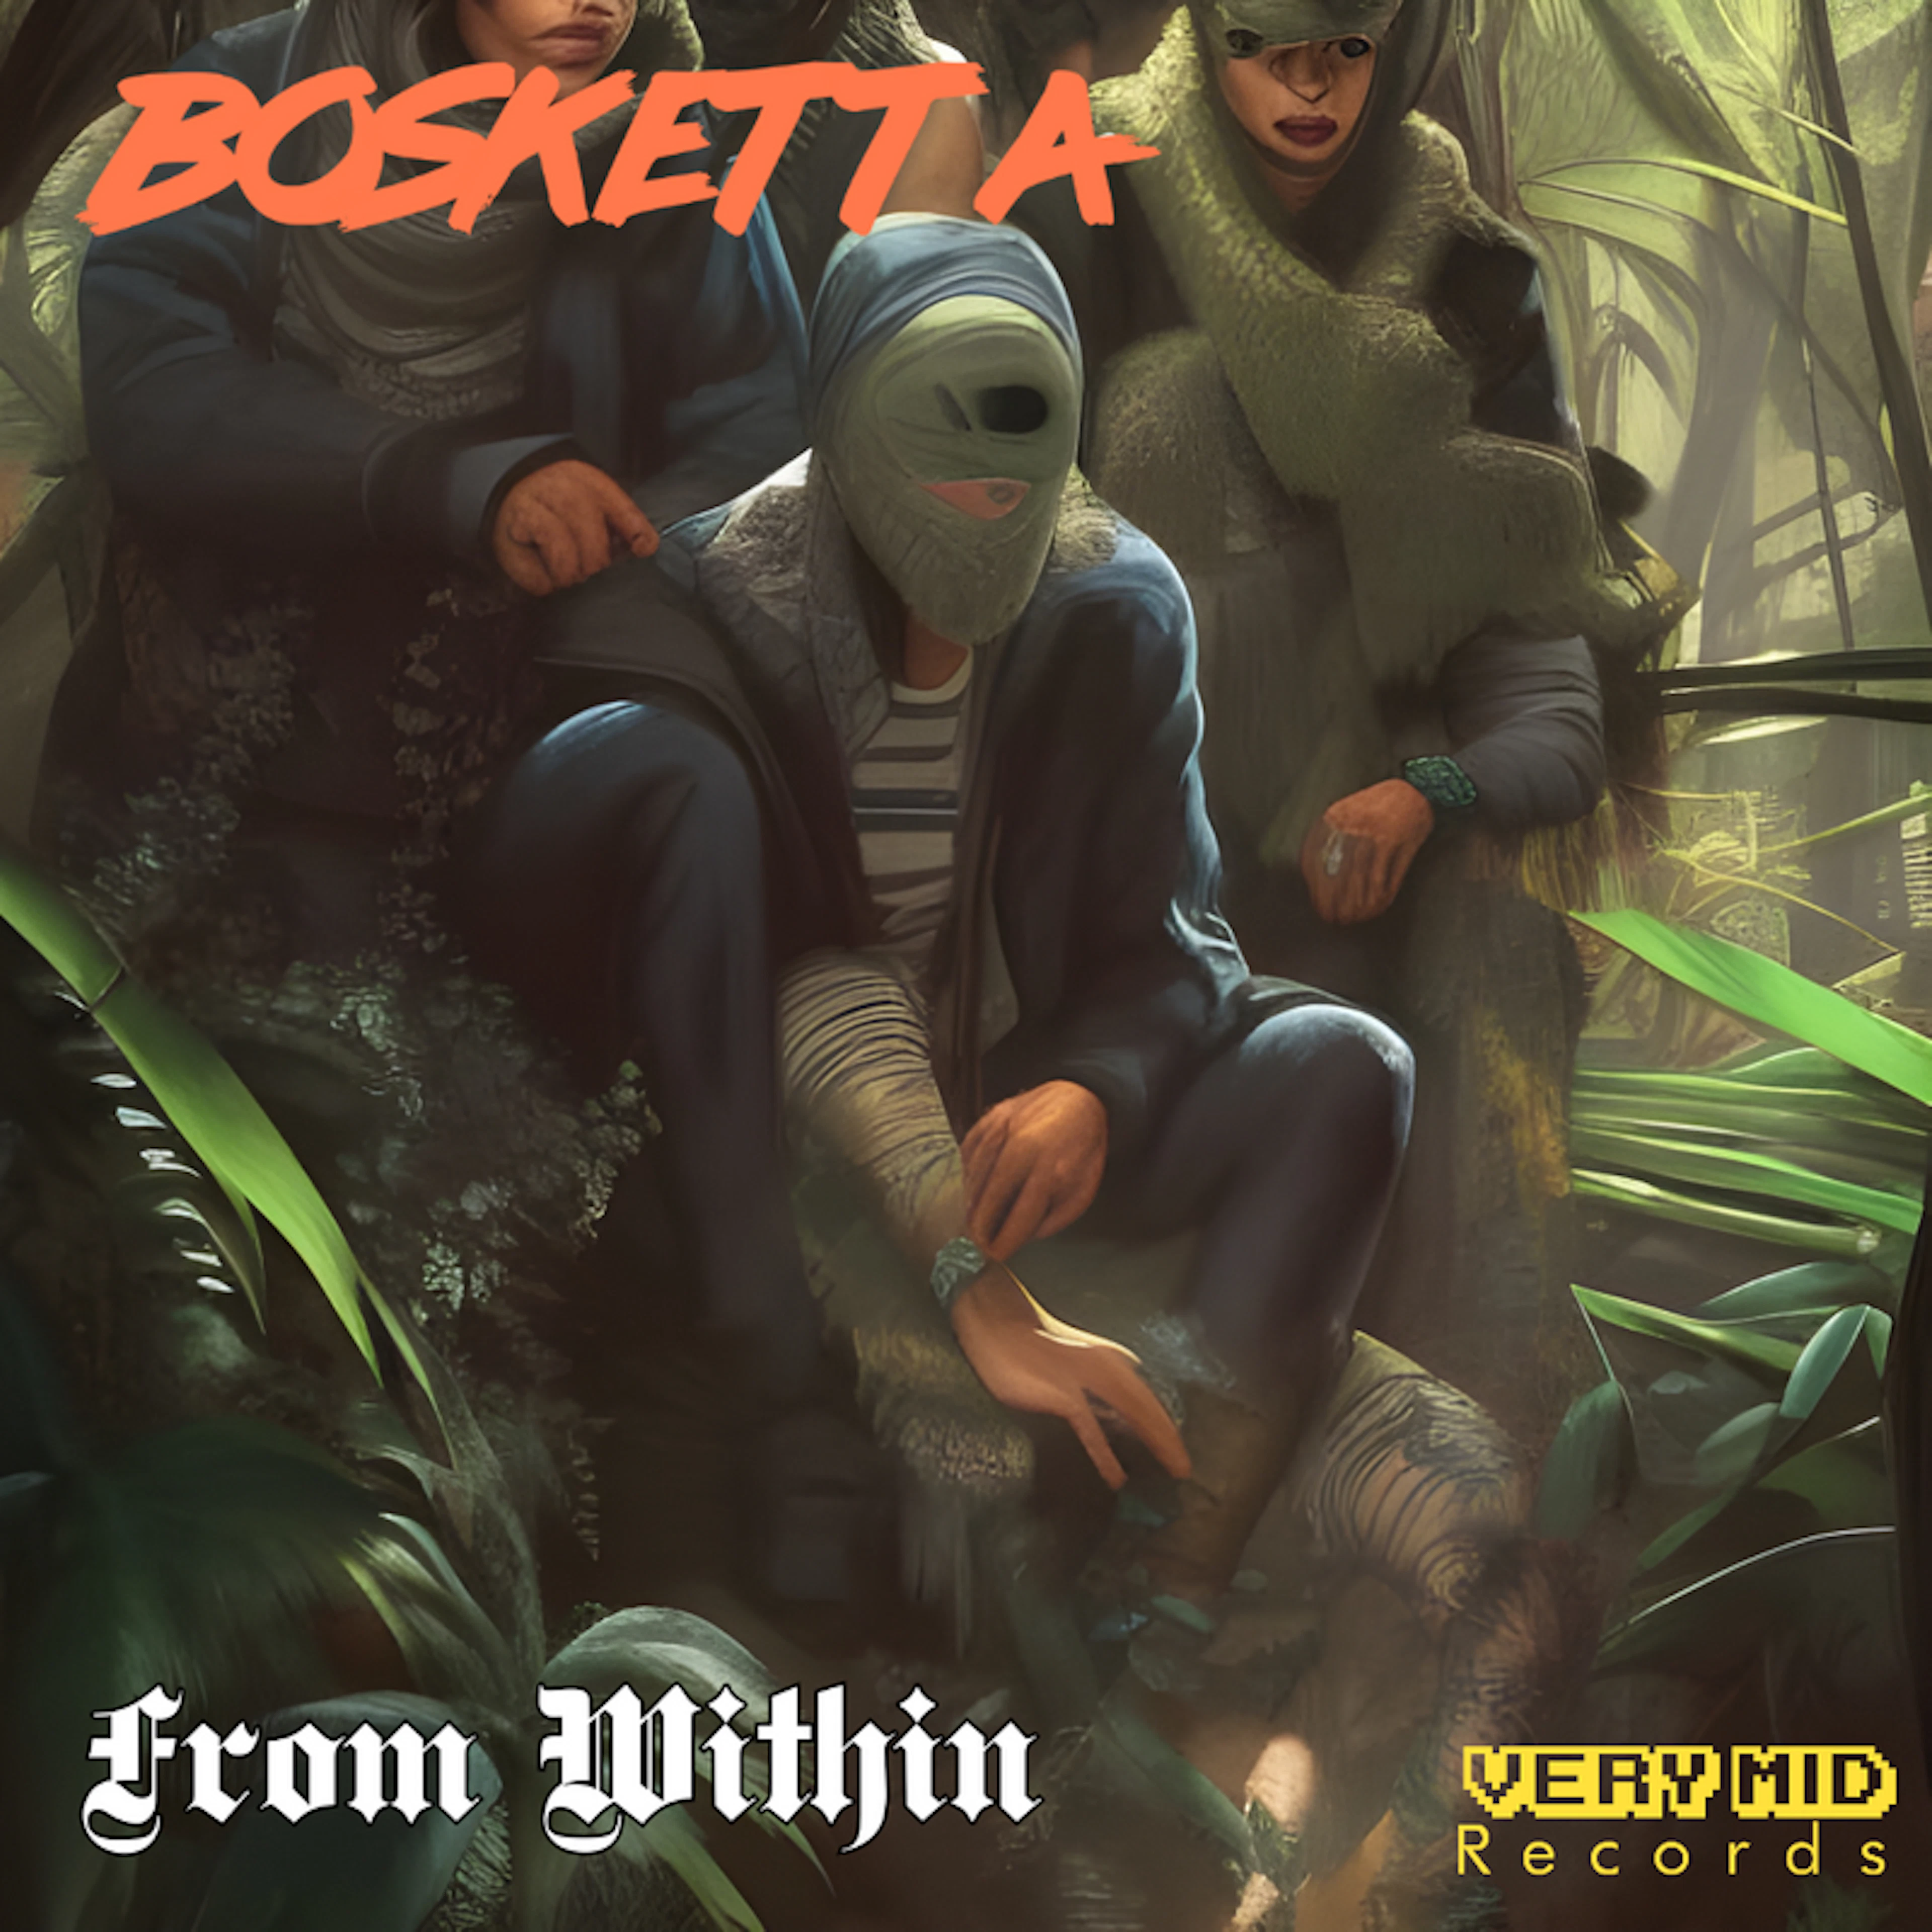 Bosketta - From Within